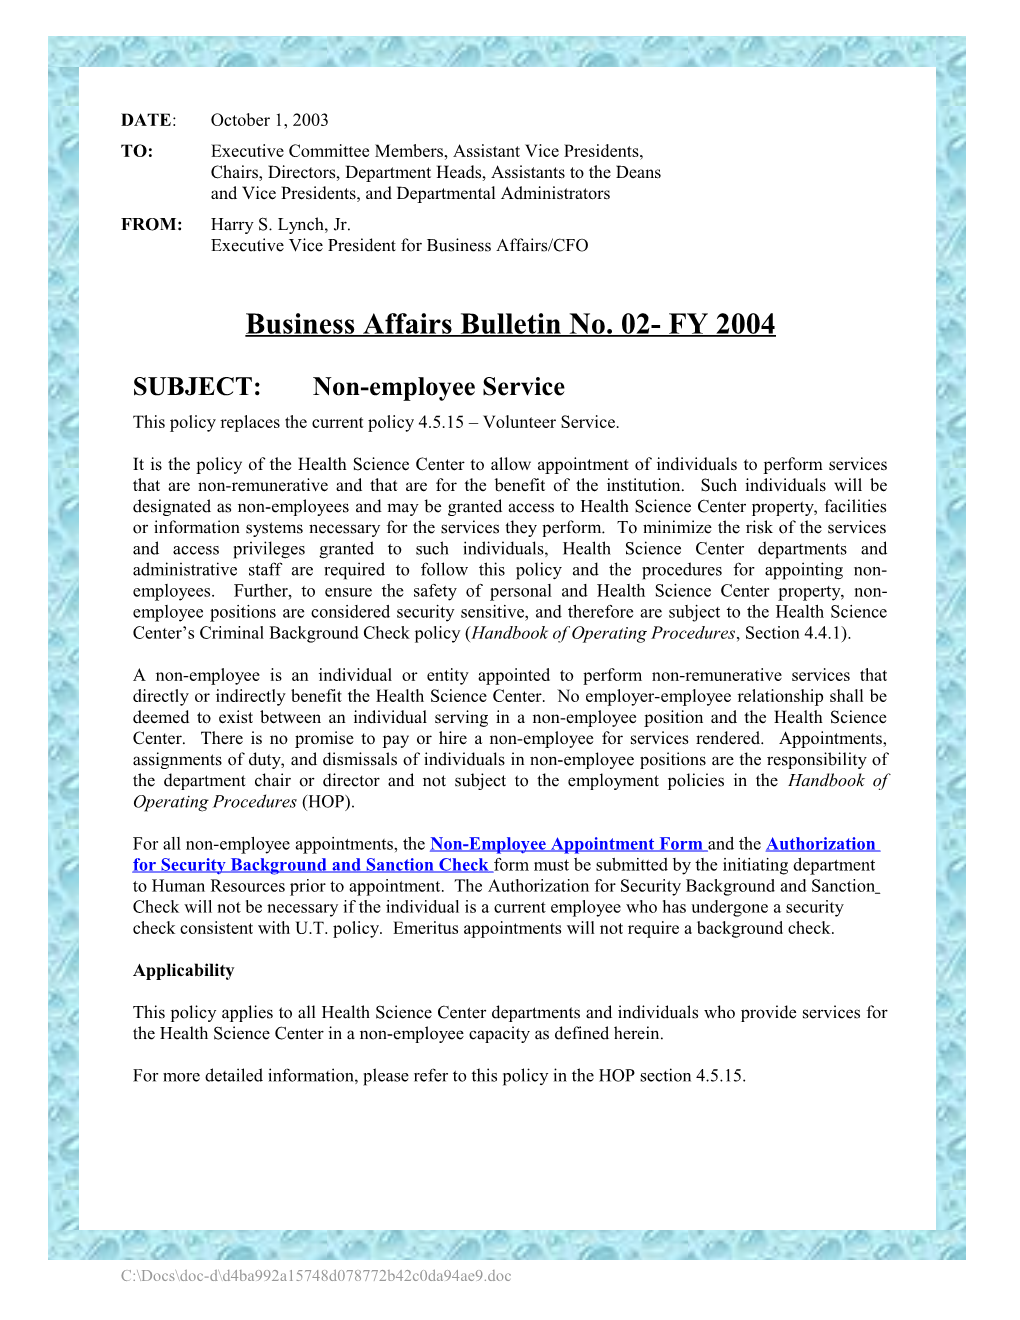 Business Affairs Bulletin No. 02- FY 2004